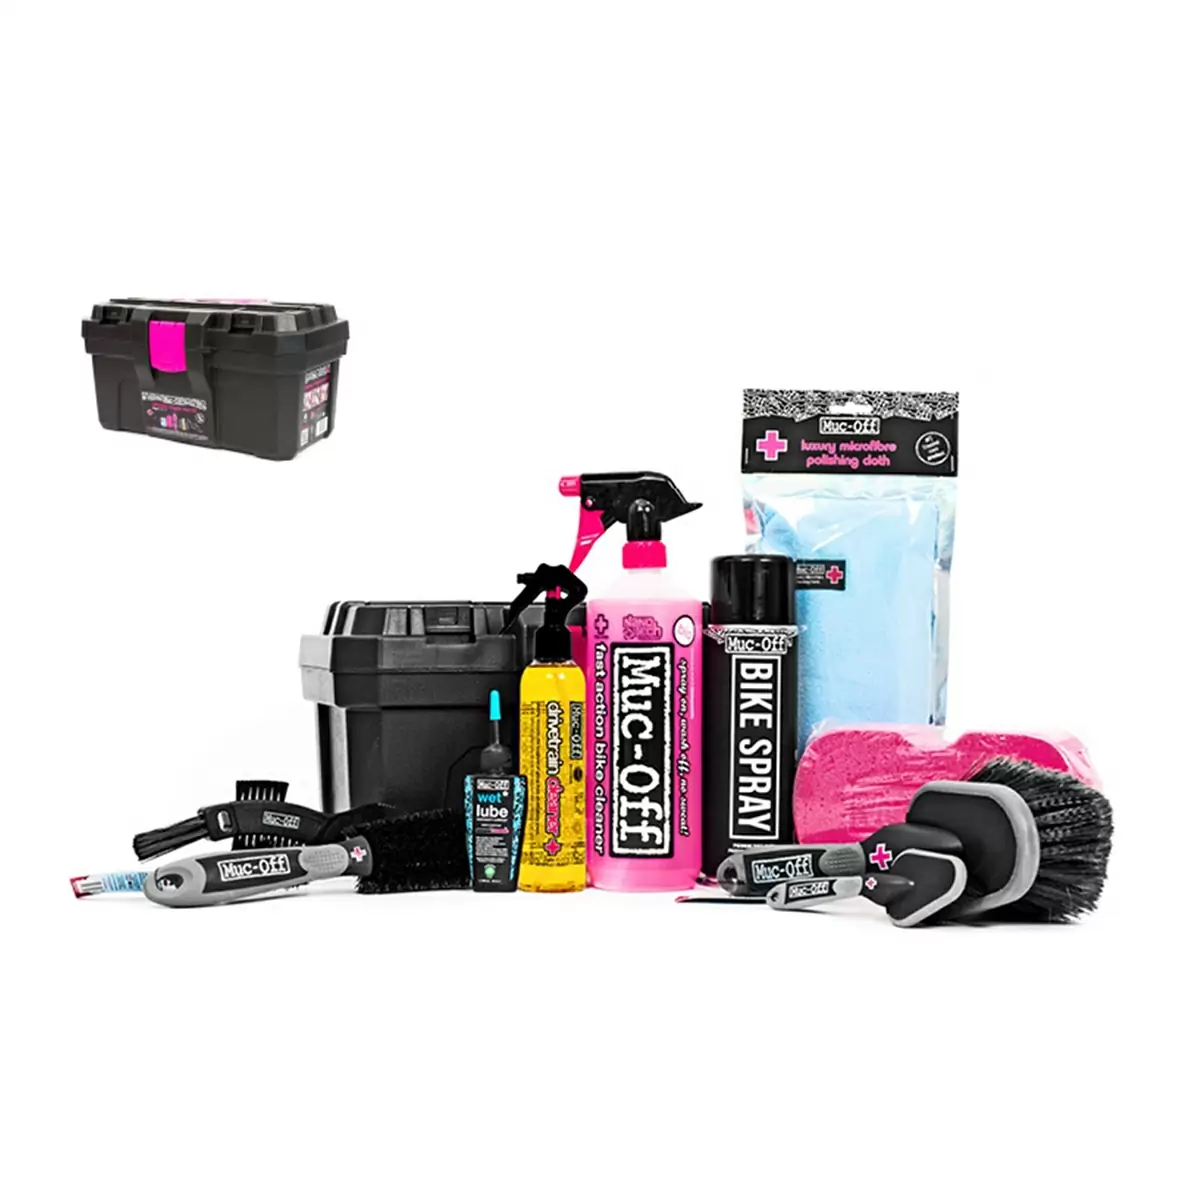 The Ultimate Bicycle Cleaning Kit from Muc-Off